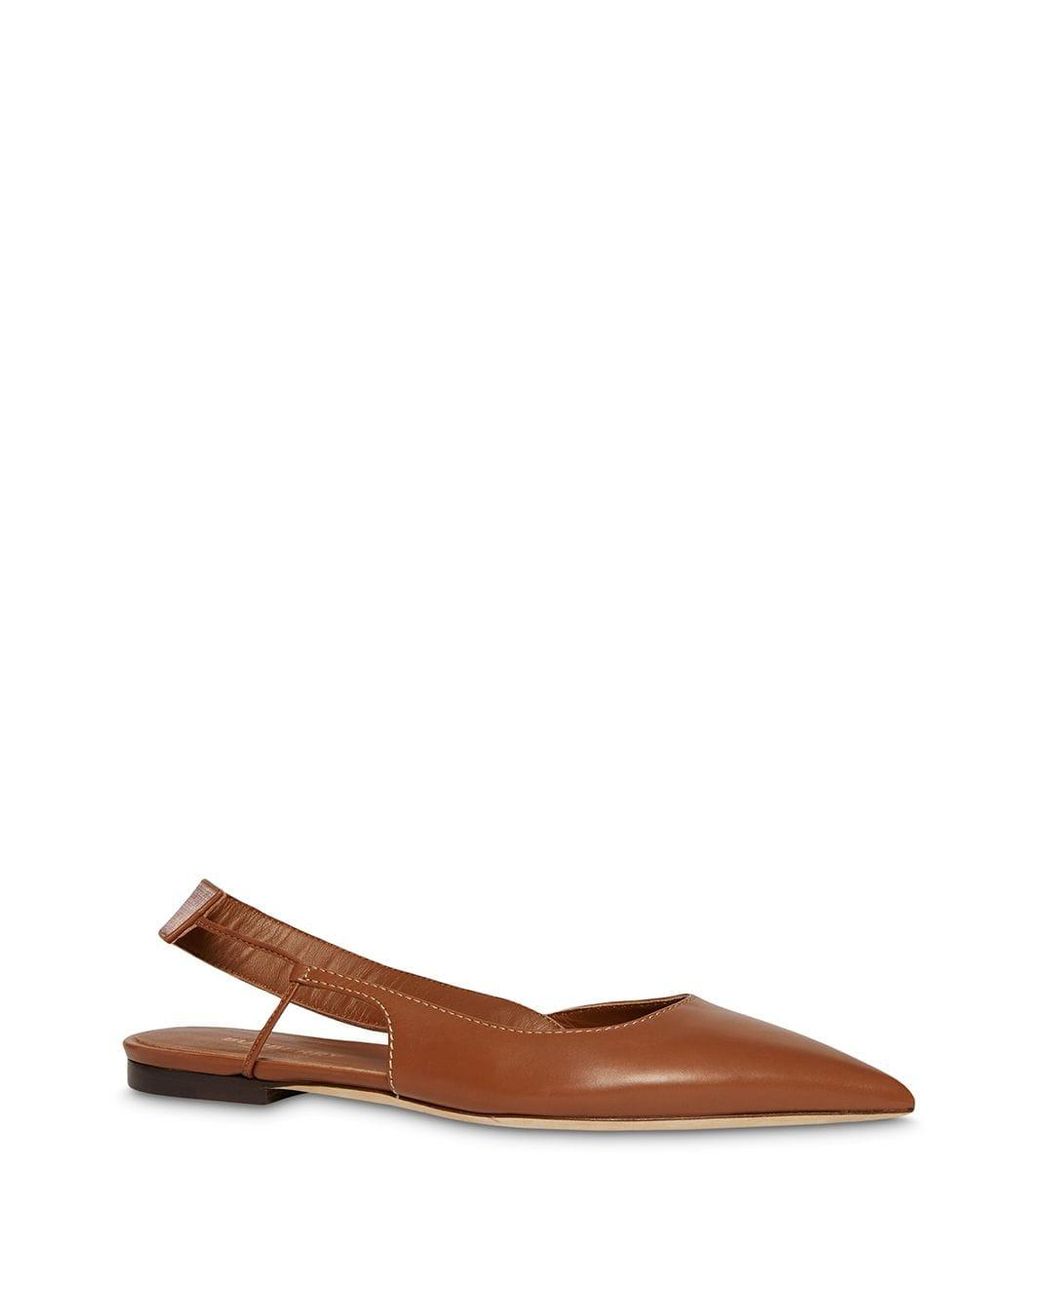 Burberry Leather Maria Flat Slingback Ballet Flats in Tan (Brown) | Lyst